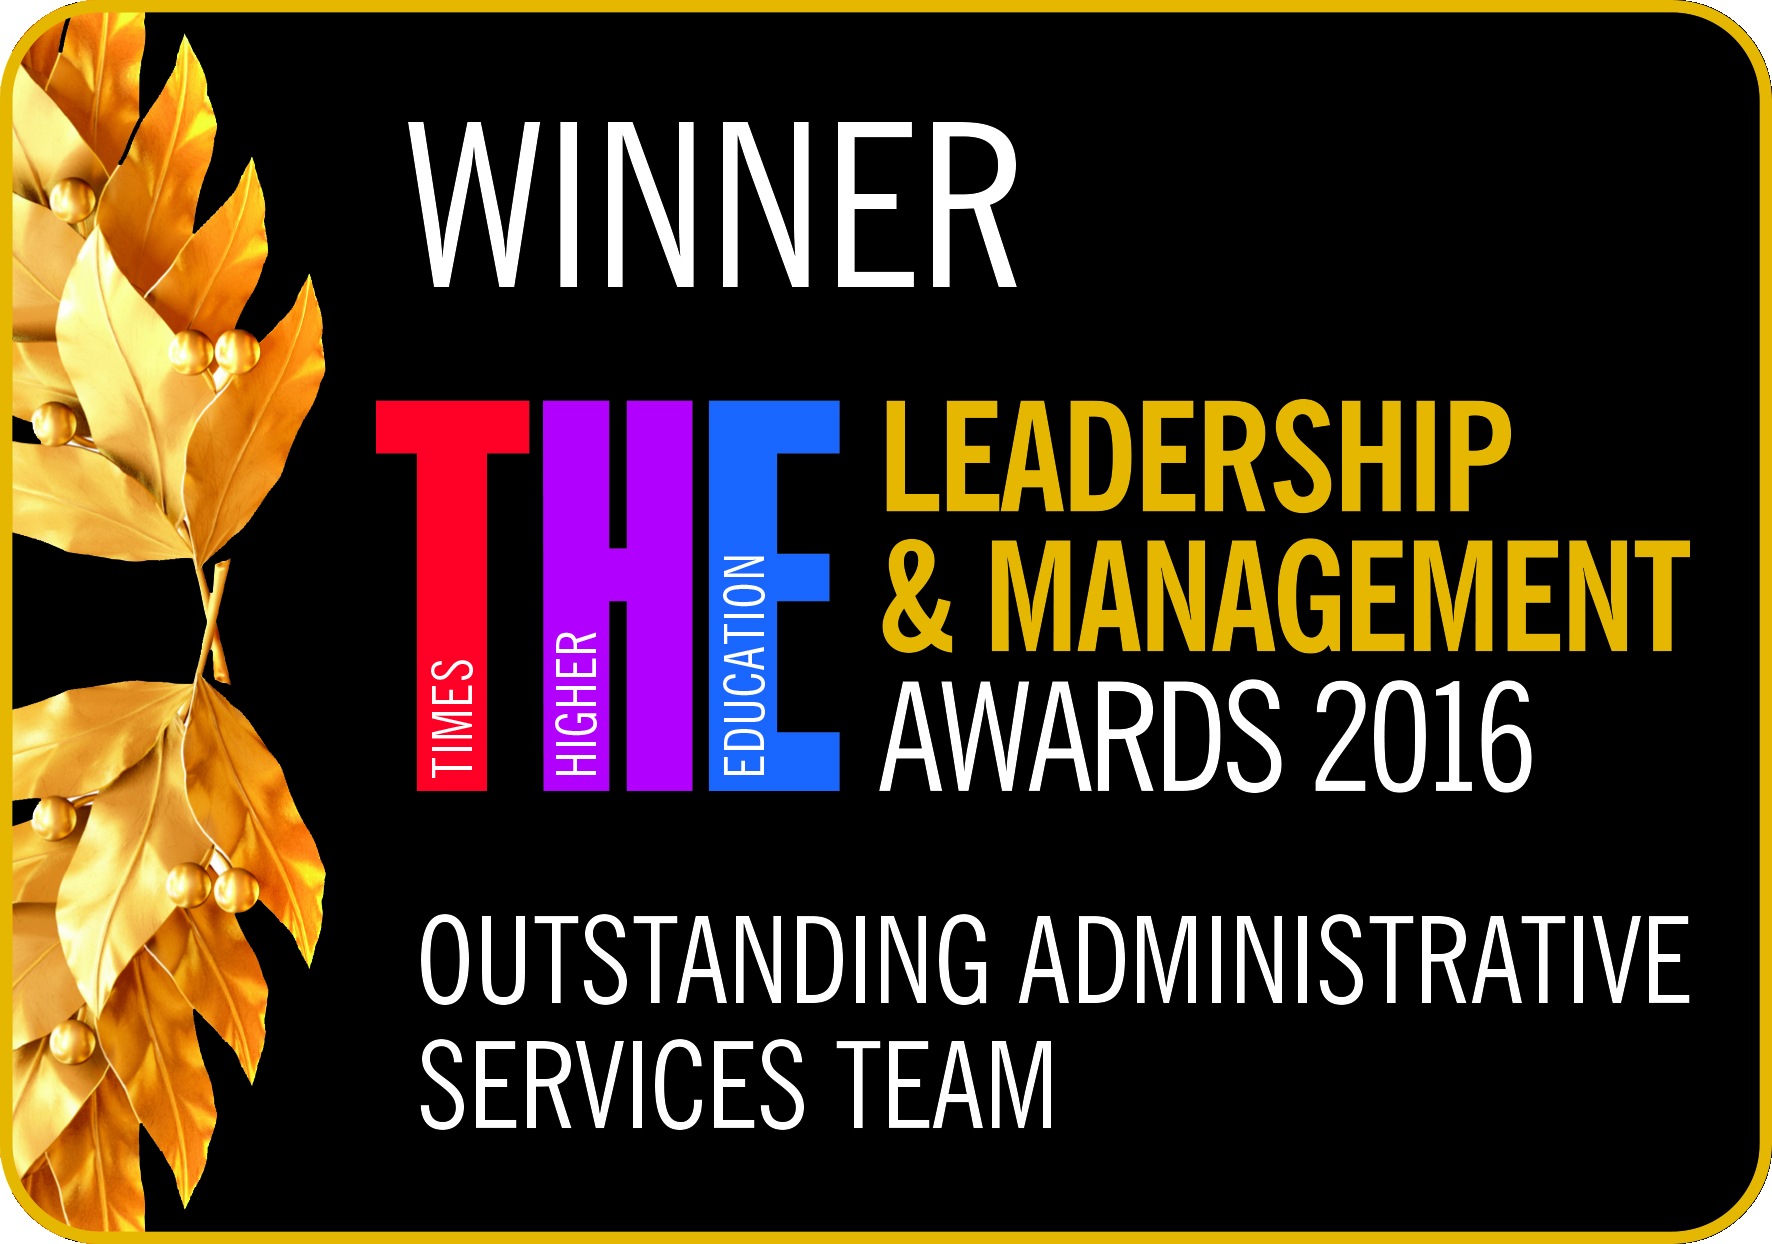 times higher education awards logo which states 'Winner - Times higher education leadership & management awards 2016, outstanding administrative services team